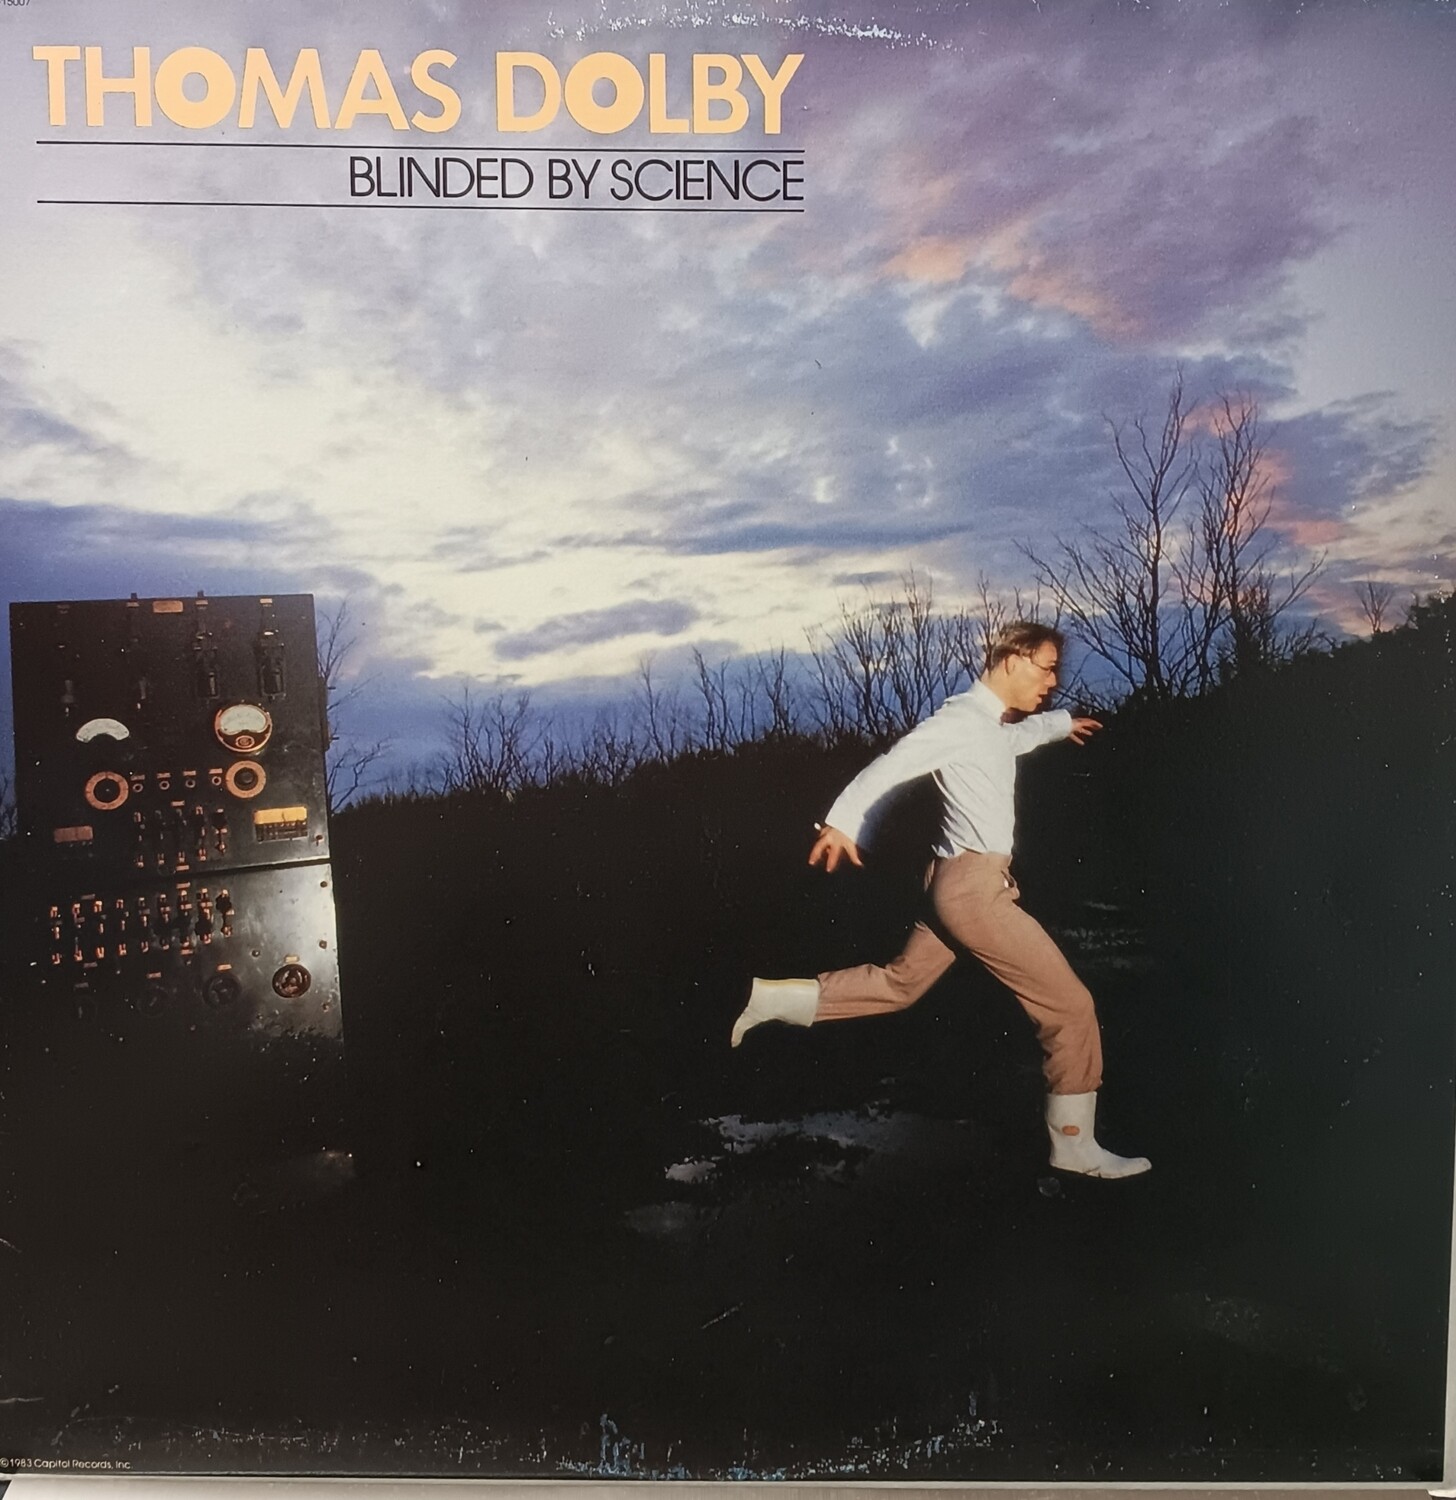 THOMAS DOLBY - Blinded by science